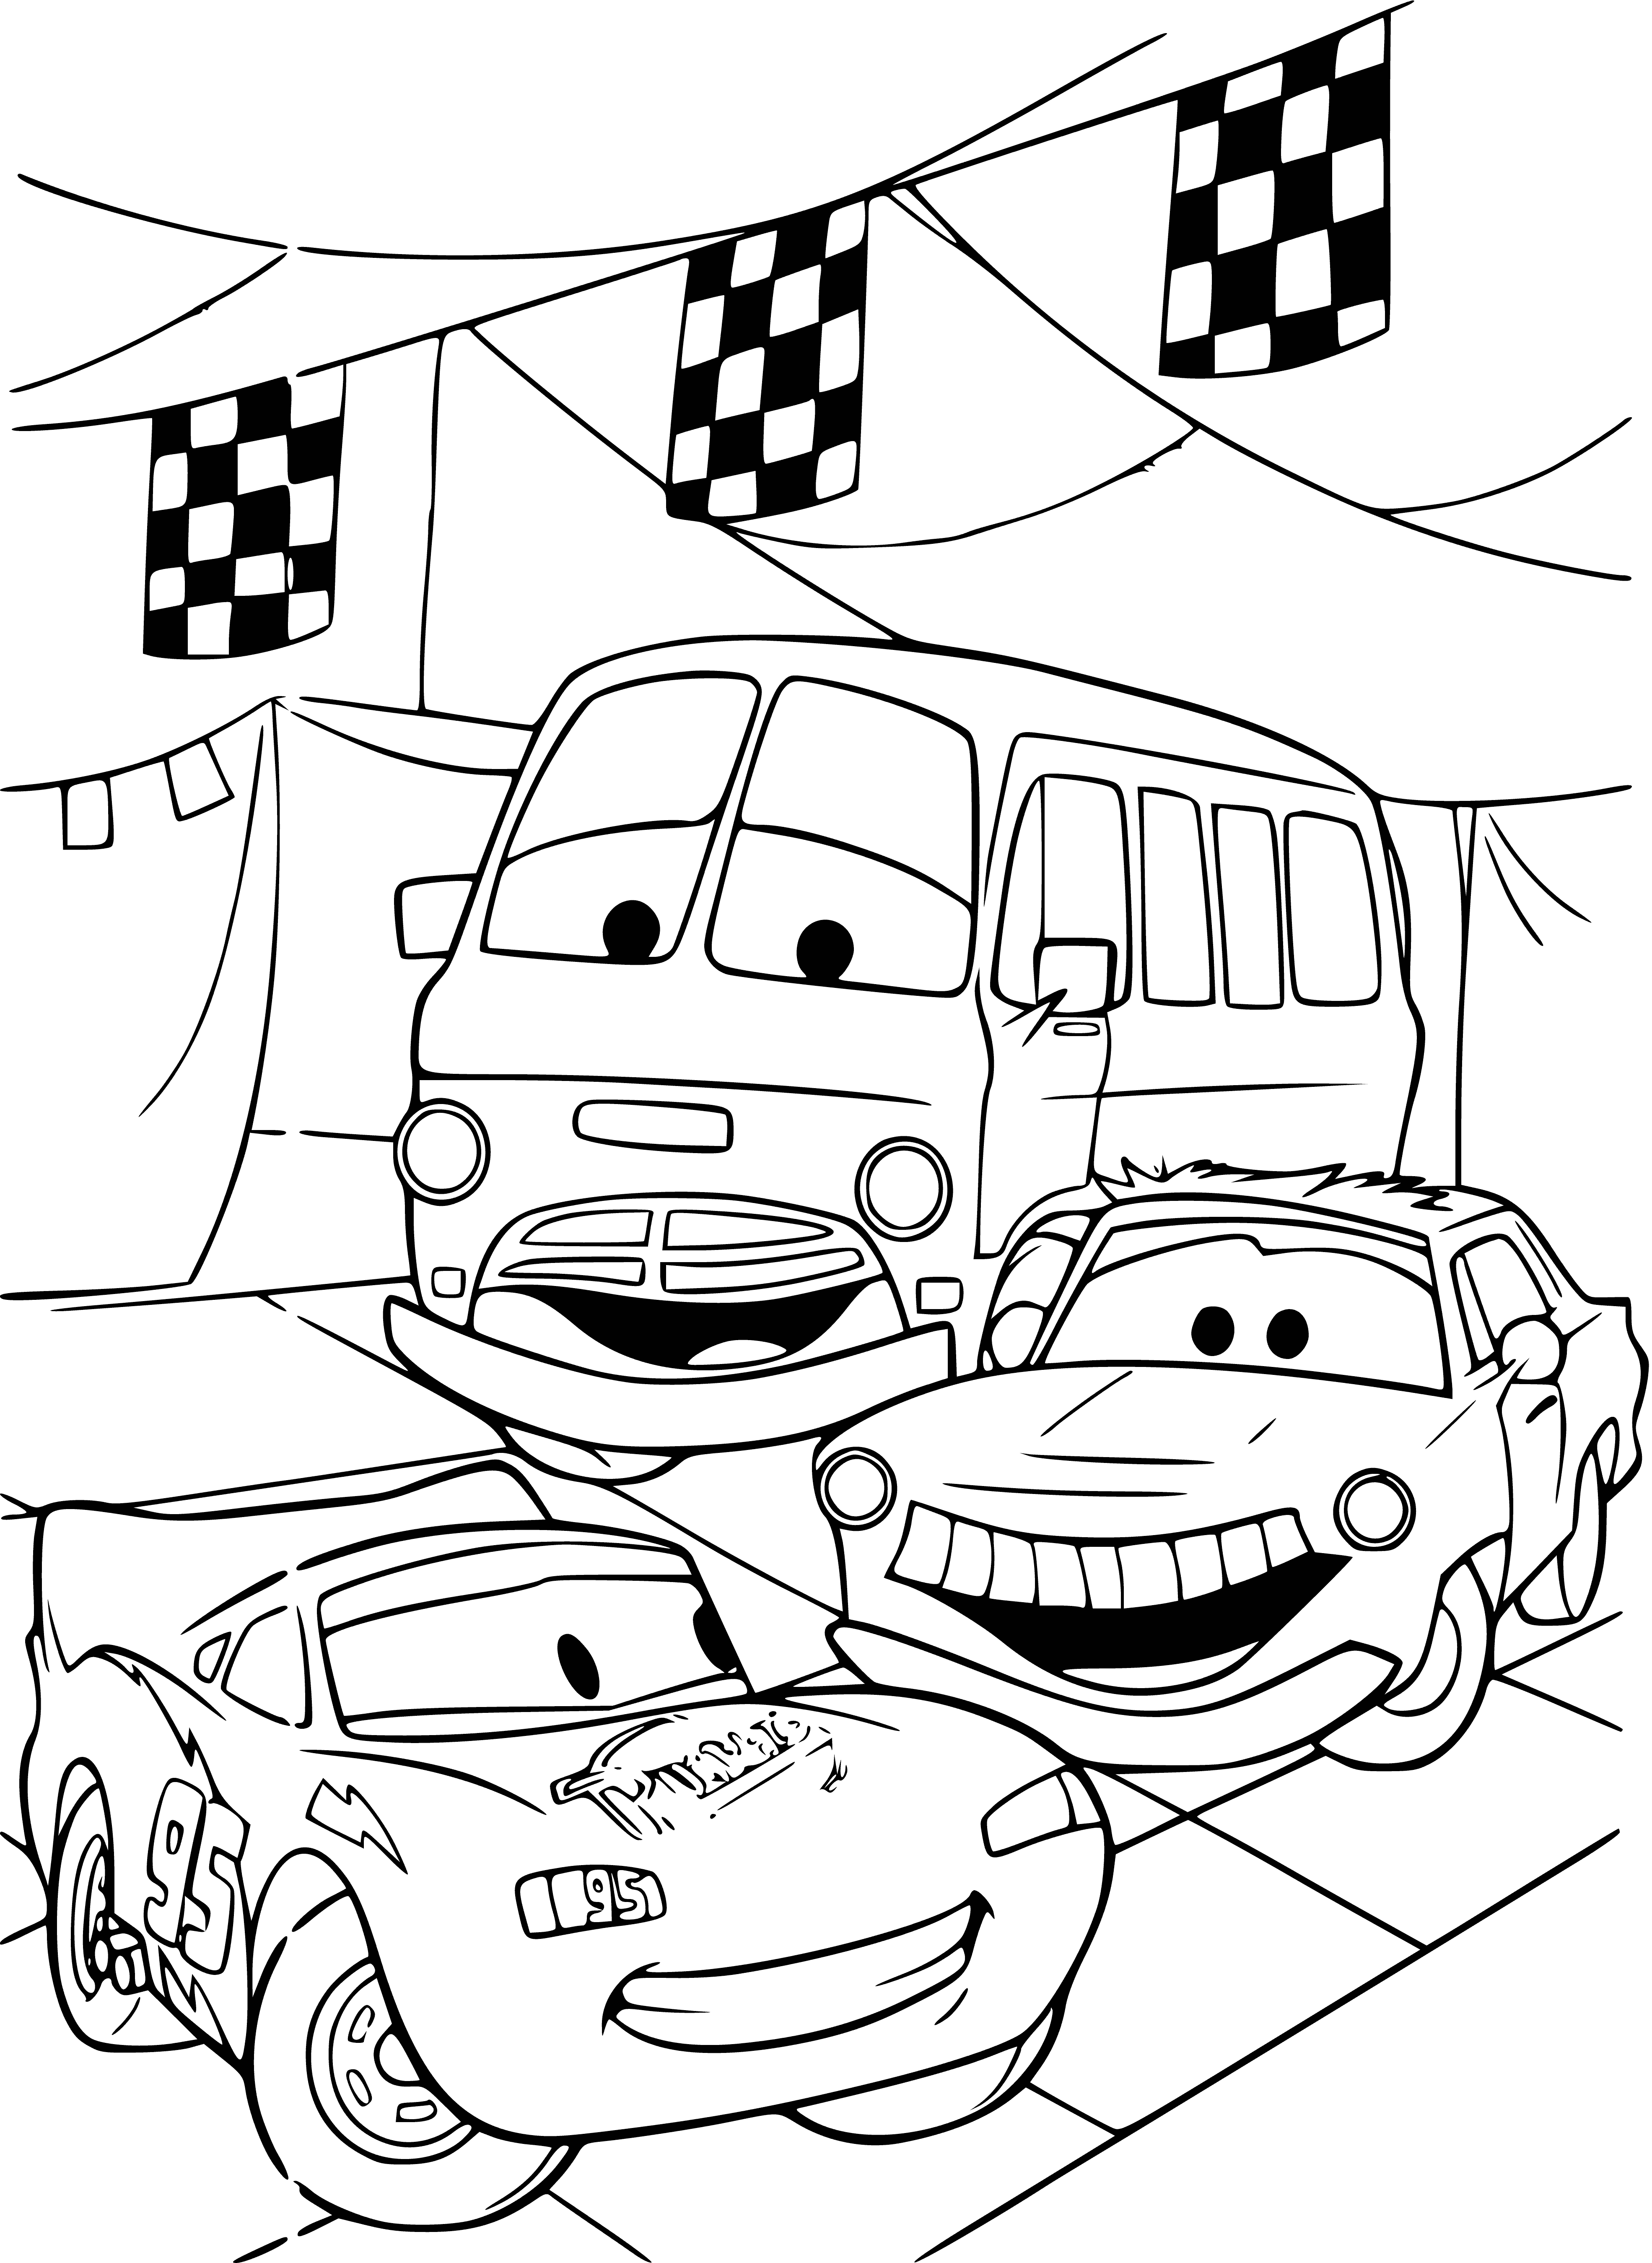 coloring page: Two drivers in racing & regular outfits talking, with a trophy on hood of racing suit driver's car.